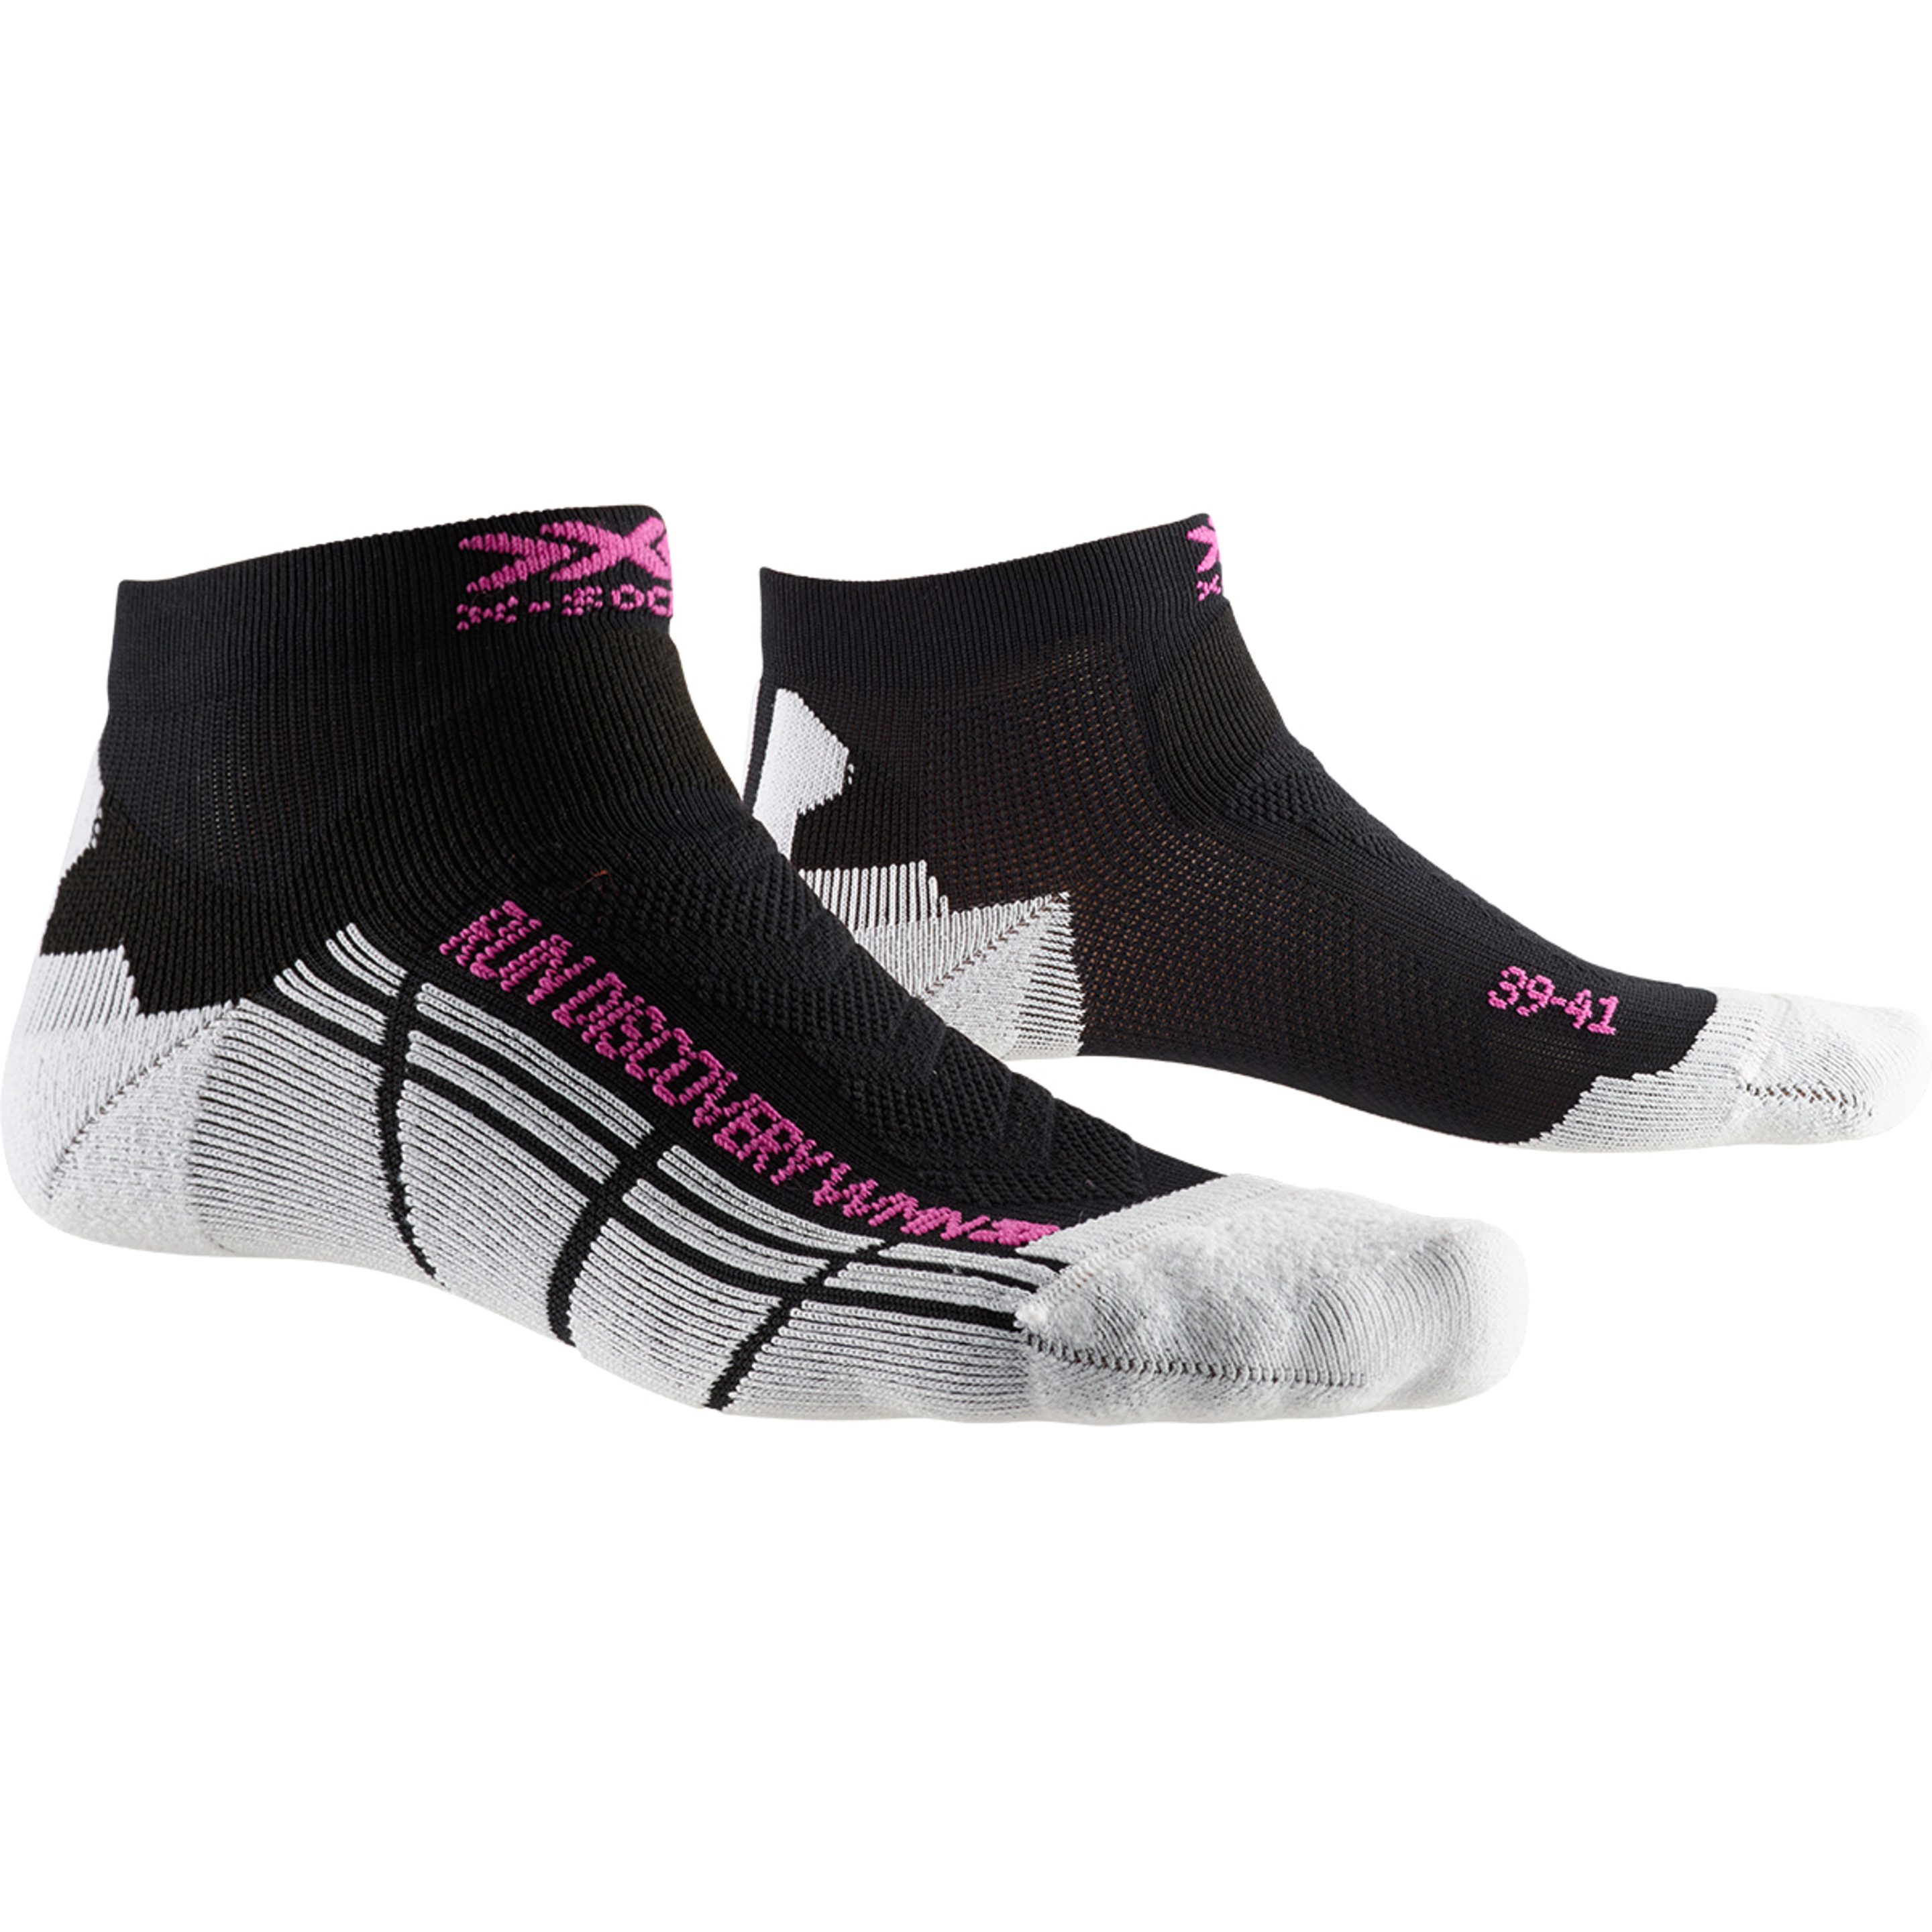 Calcetin Run Discovery Mujer (multiplo 3 Uds) X-socks